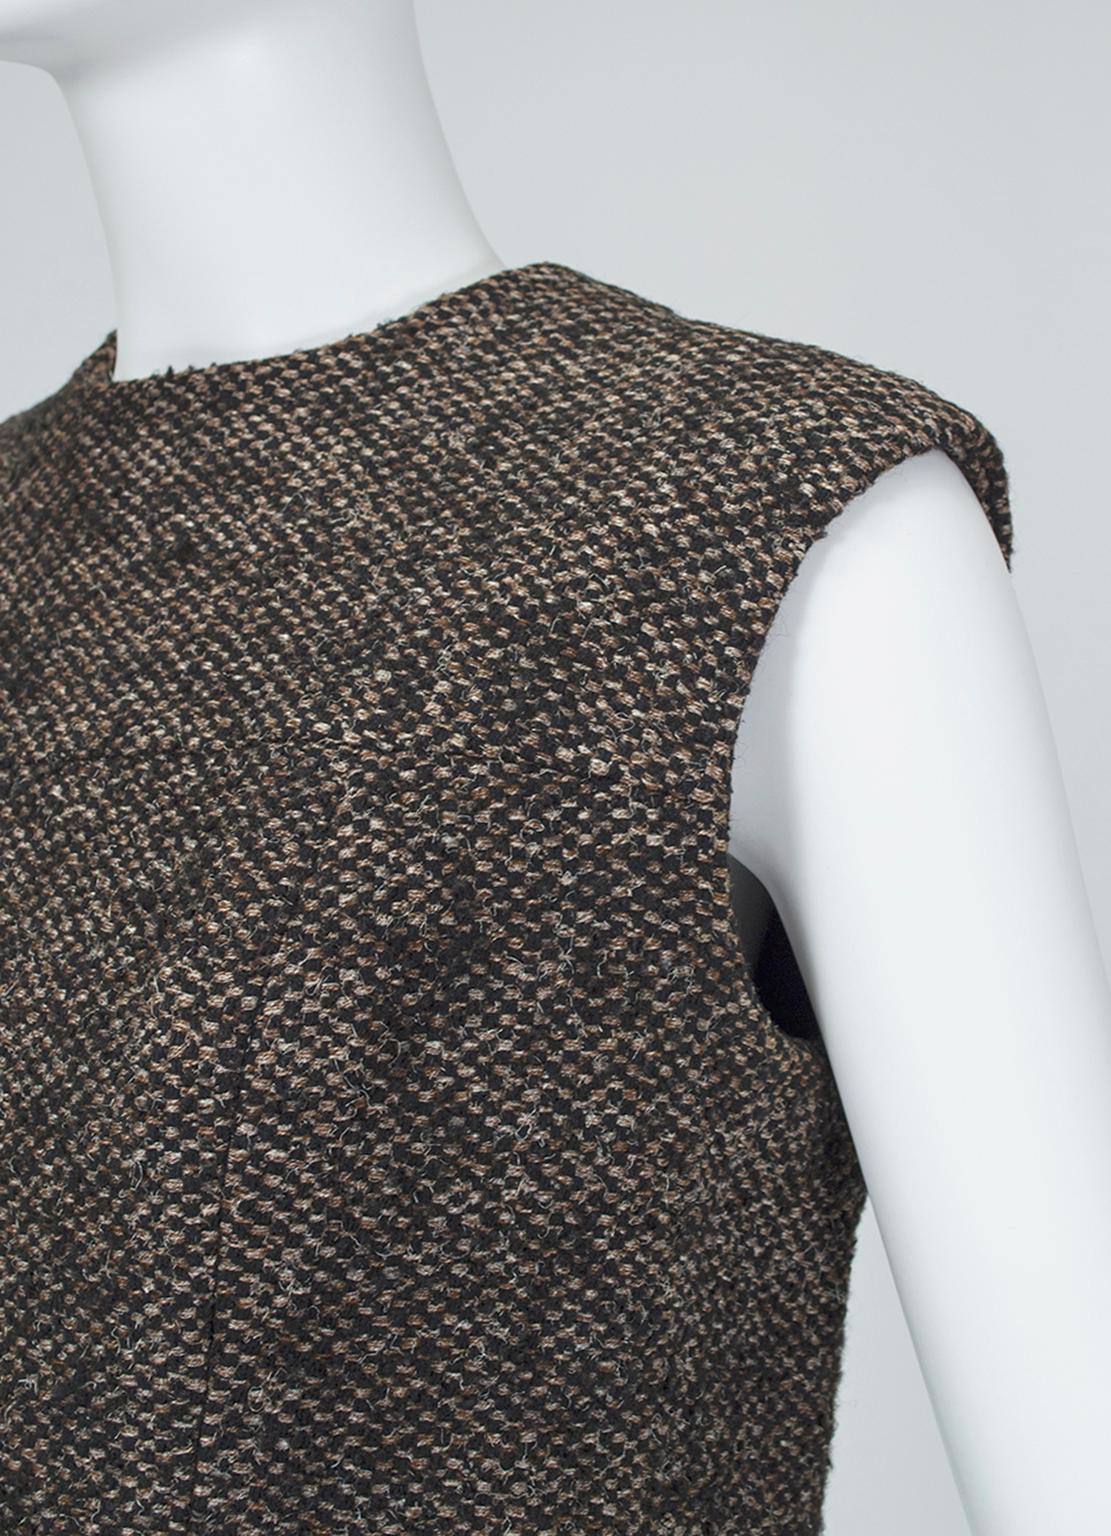 James Galanos Brown Tweed Jacket w Matching Sleeveless Fringe Top - M, 1980s For Sale 2